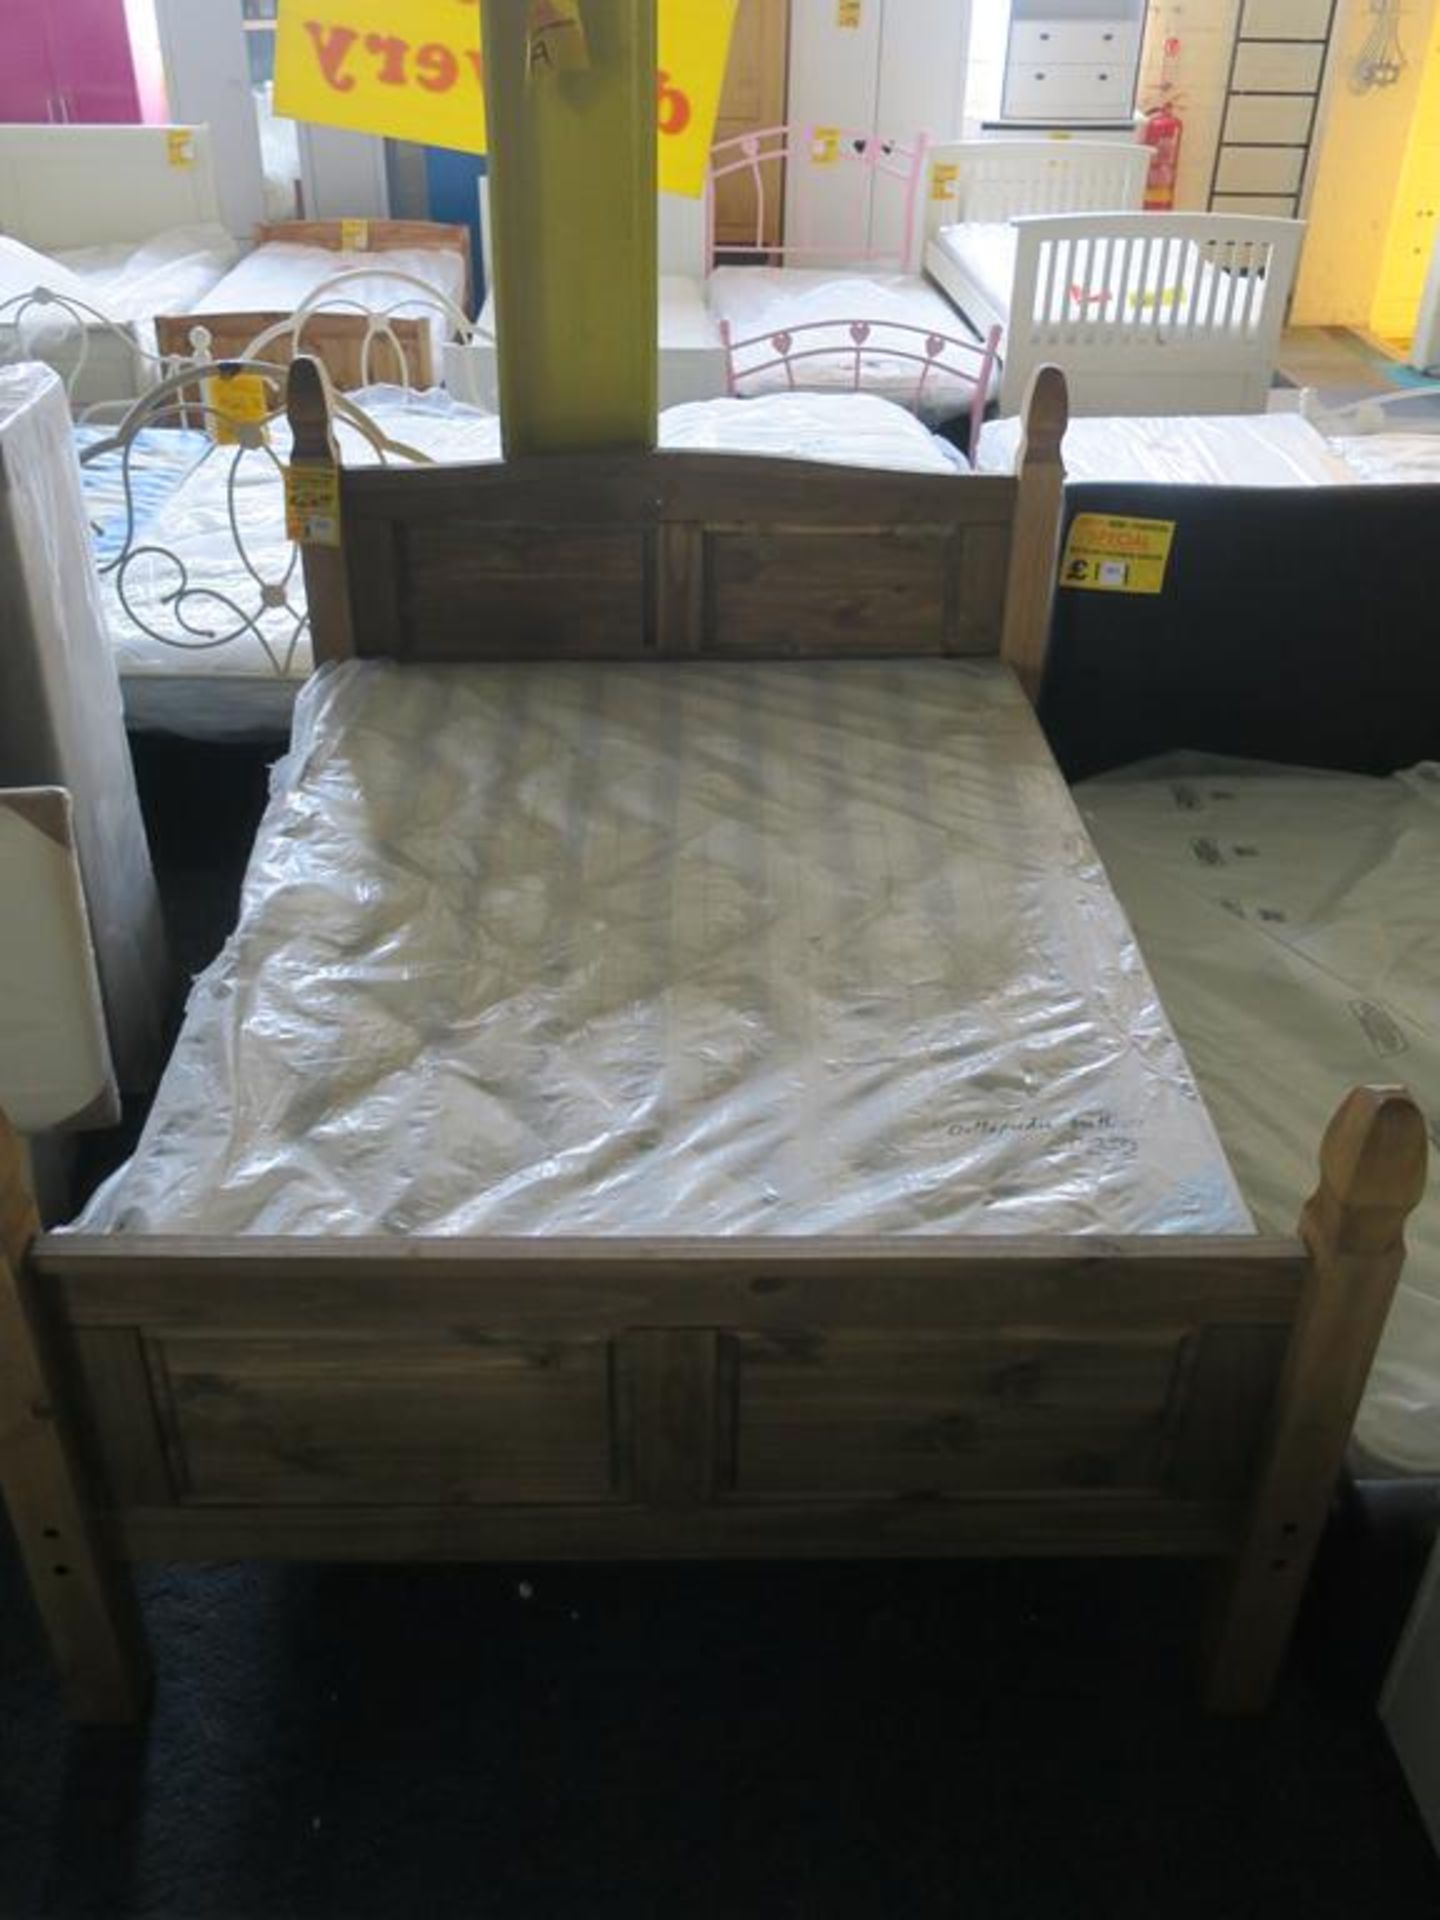 * A Corona Double Bed Frame Together with a Double Orthopedic Mattress